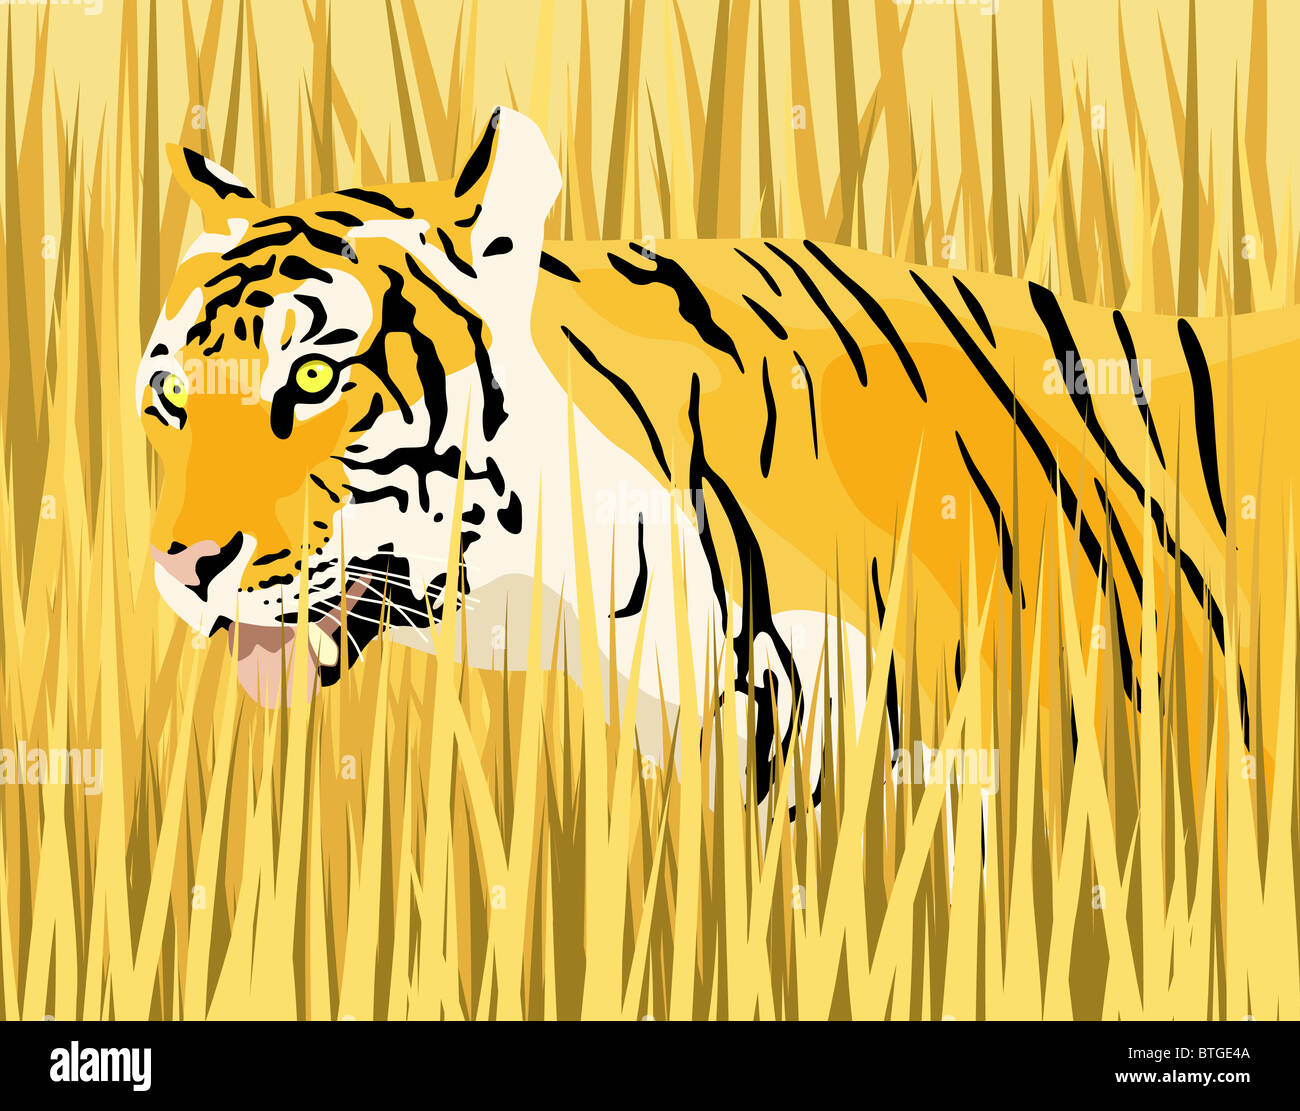 Illustration of a tiger in dry grass Stock Photo